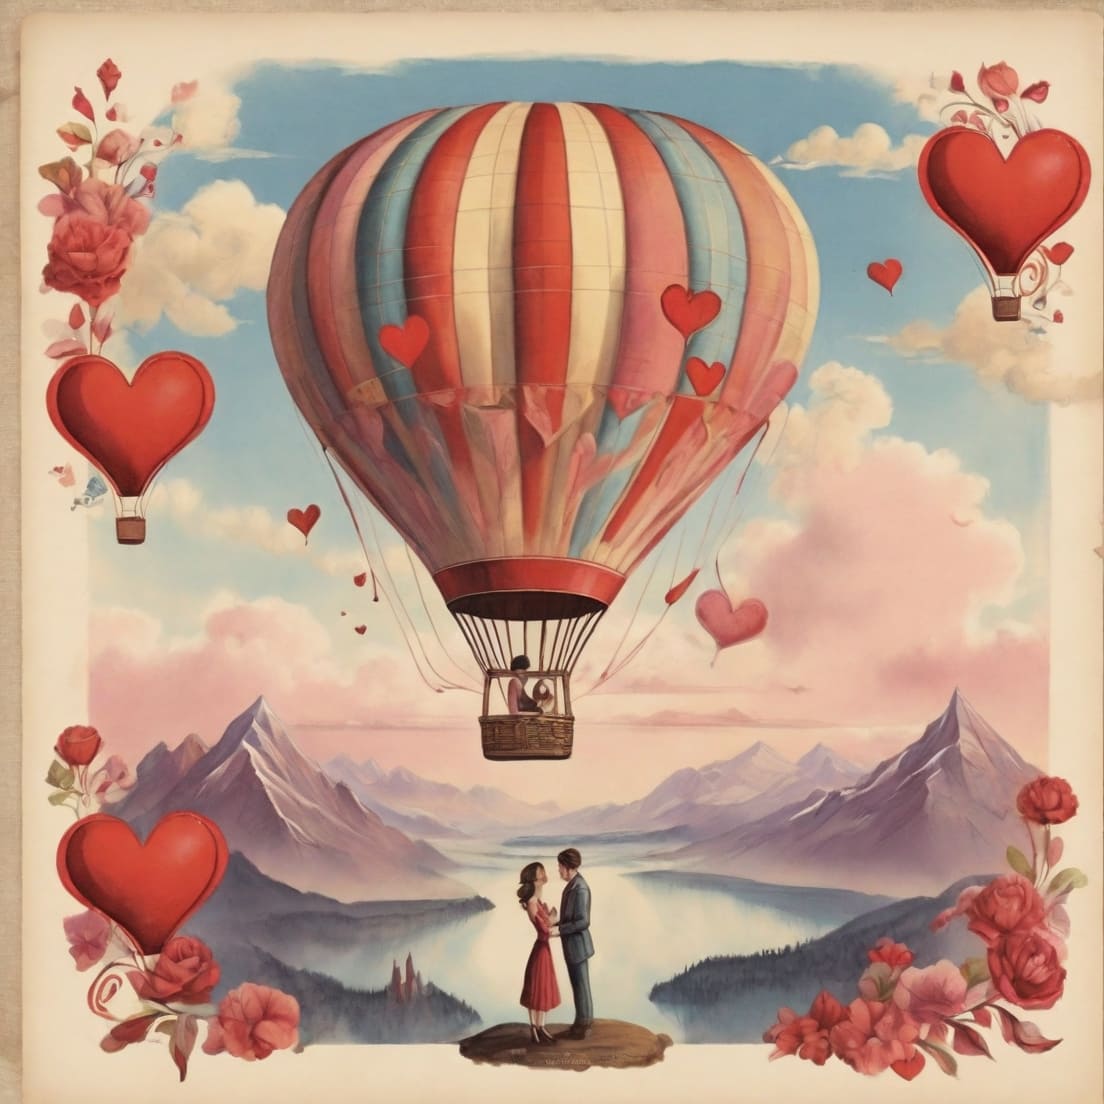 postcard, hot air balloon, man, woman, mountains, hearts in the air preview image.